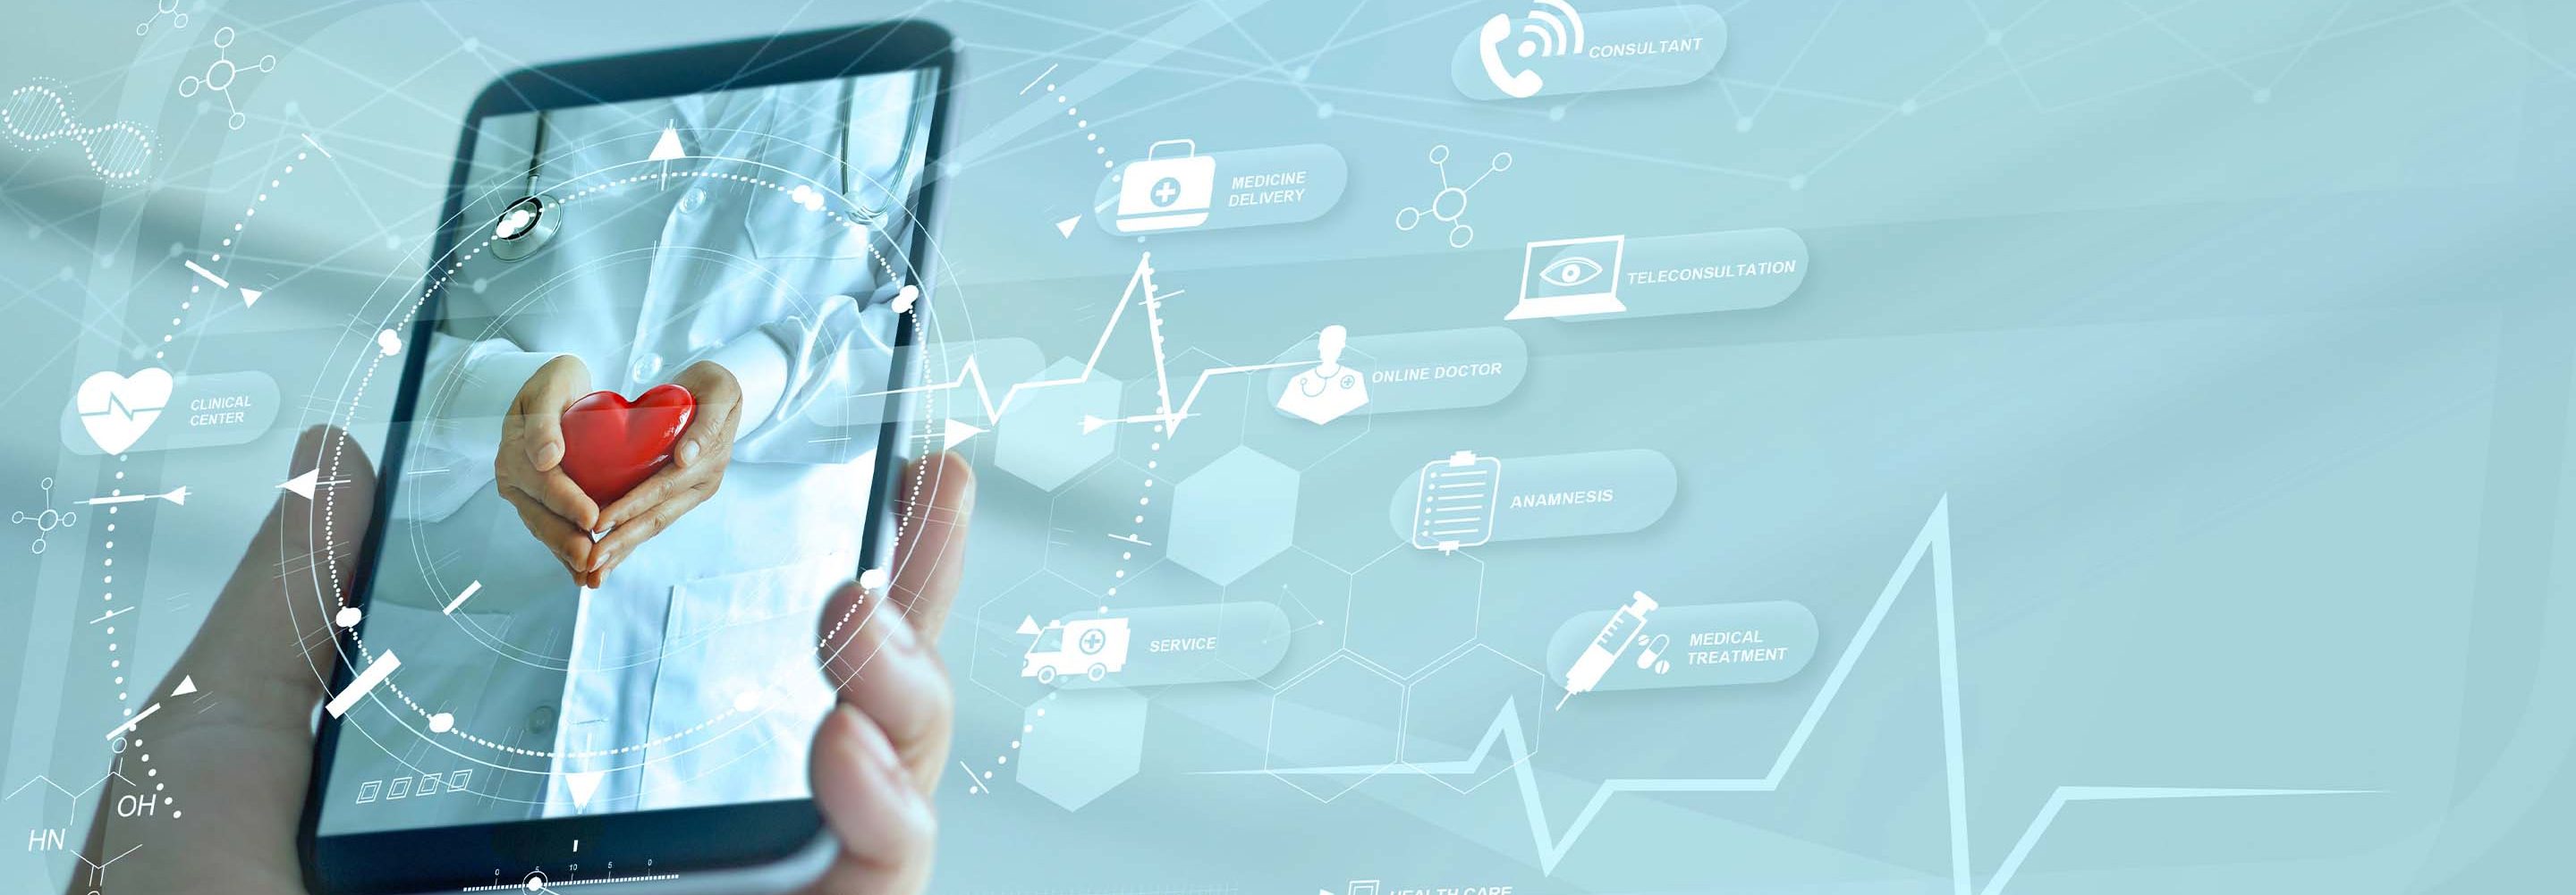 Is One Single Mobile Application Enough for Healthcare?